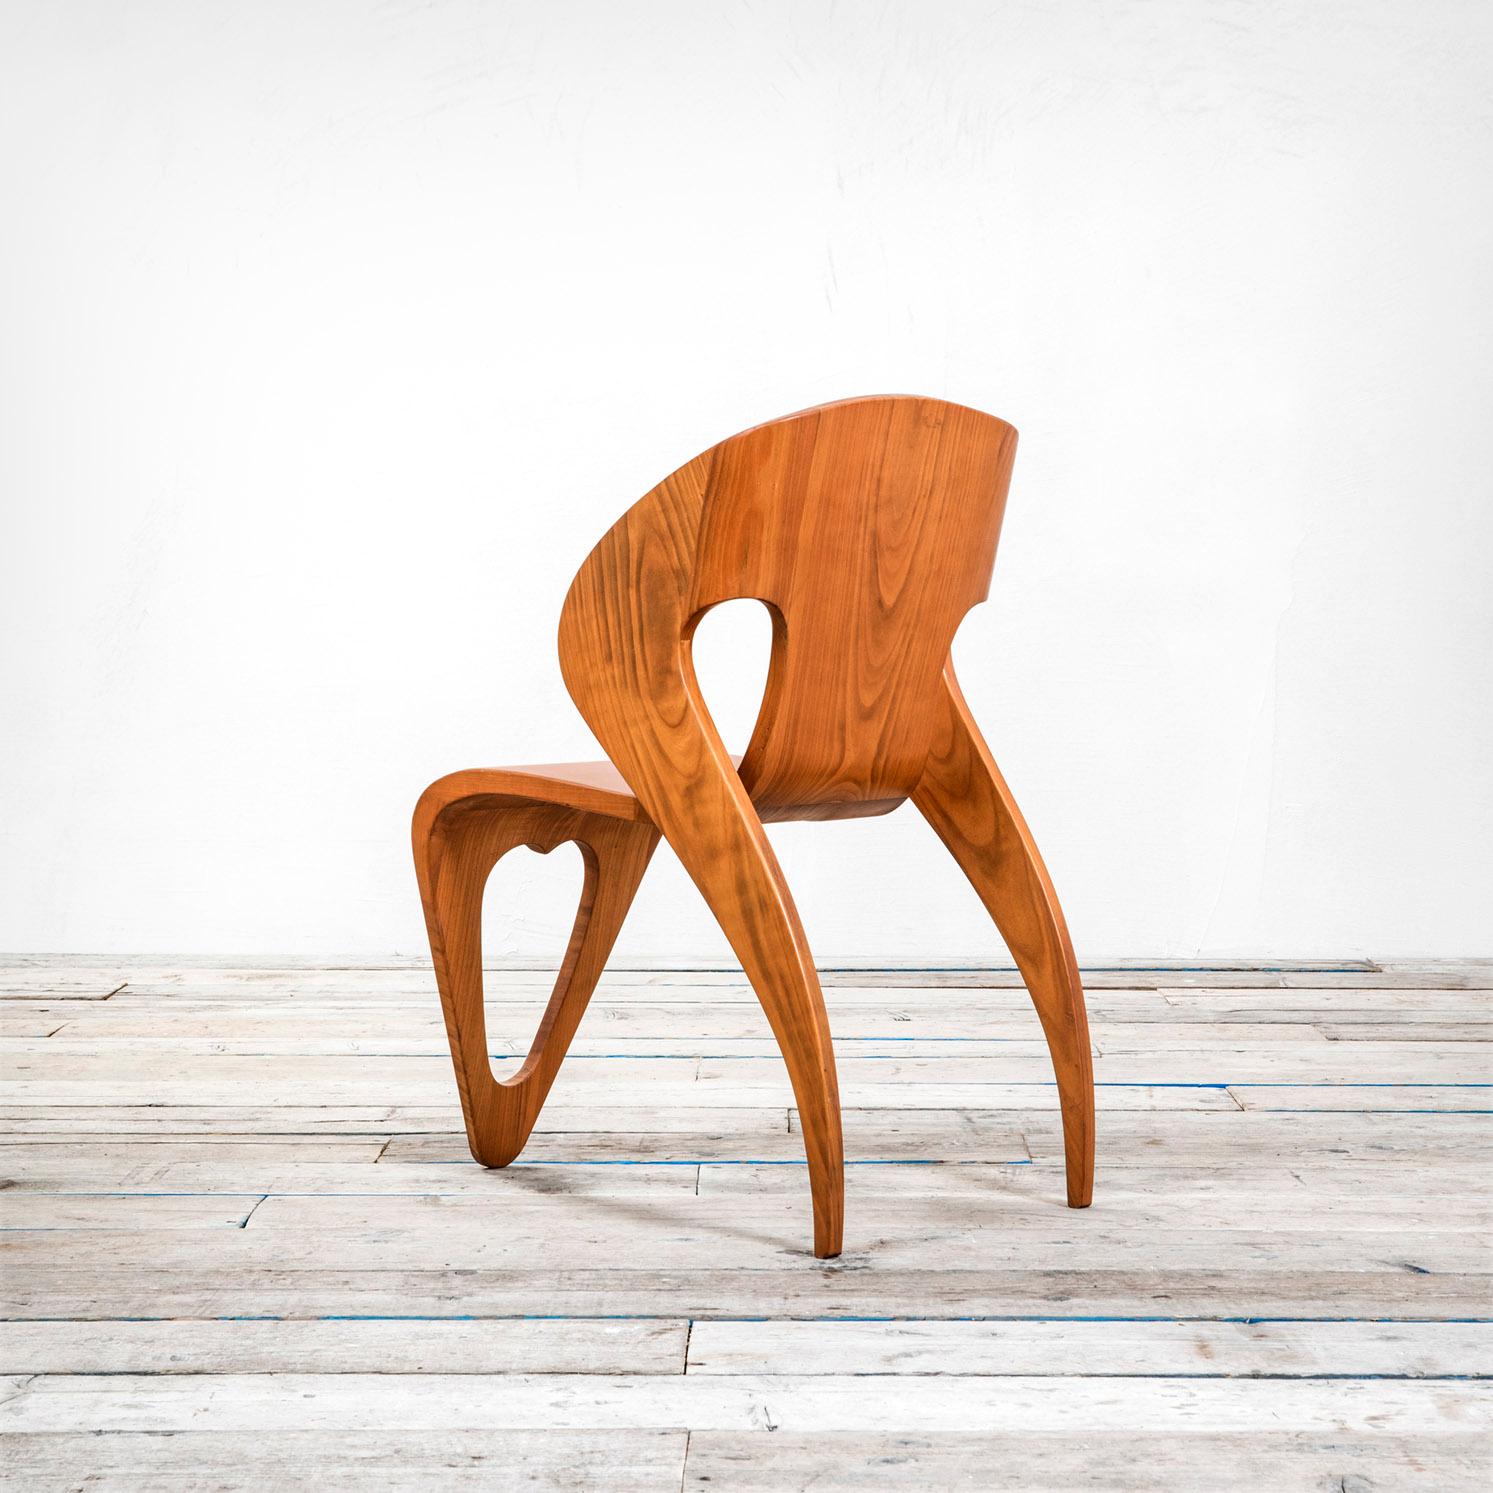 This very peculiar chair was designed by the couple of Turin Architects Roberto Gabetti and Mario Roggero at the end of '40s. This chair was designed for a project of design of Rooms' Hotel. 
The chair is meant as a unique piece of curved solid